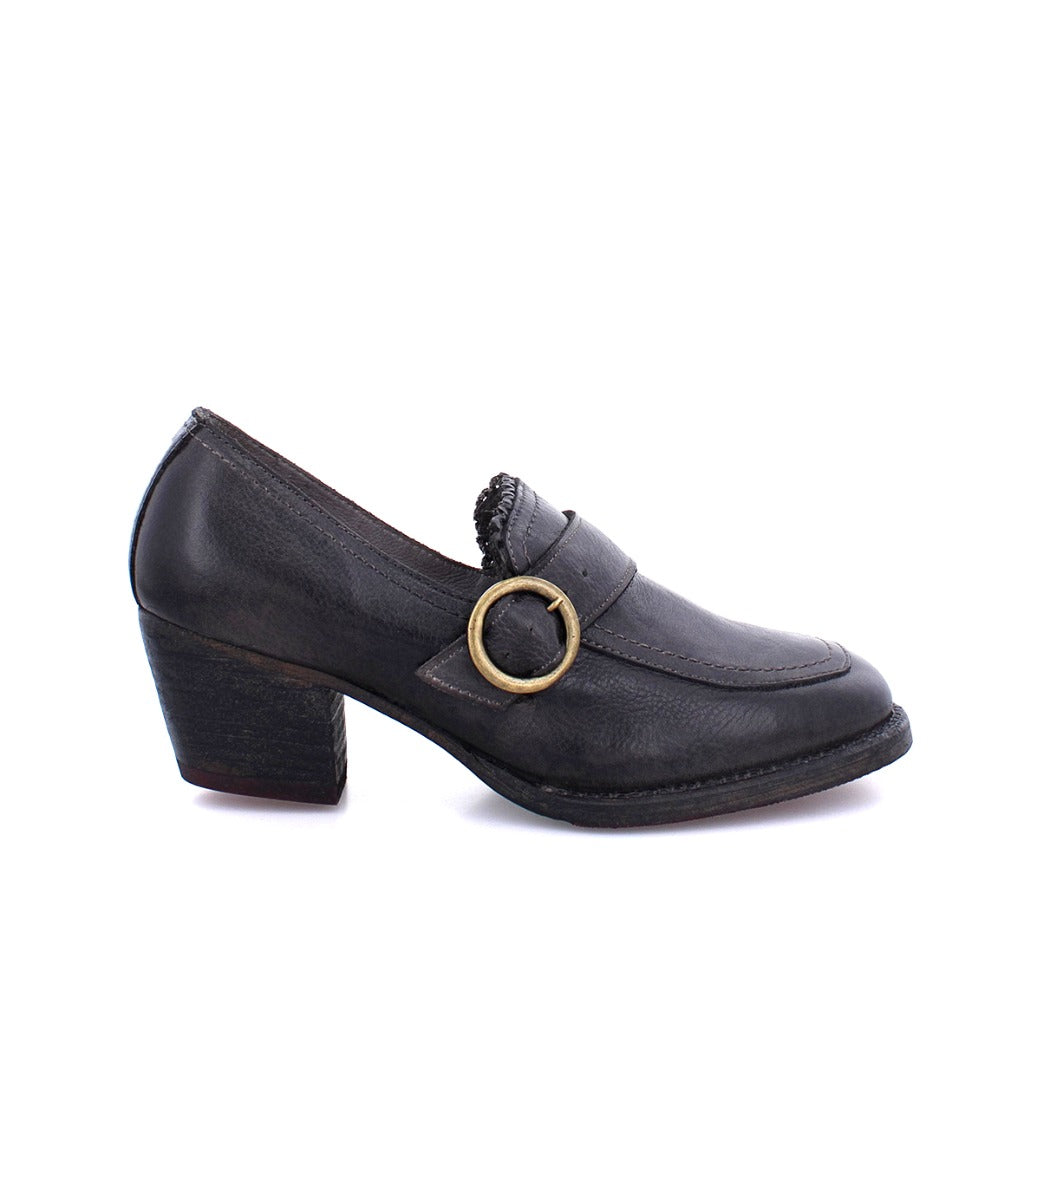 A women's black leather loafer with a gold buckle, perfect for the Oak Tree Farms Dyba or Diva looking for a stylish and comfortable shoe.